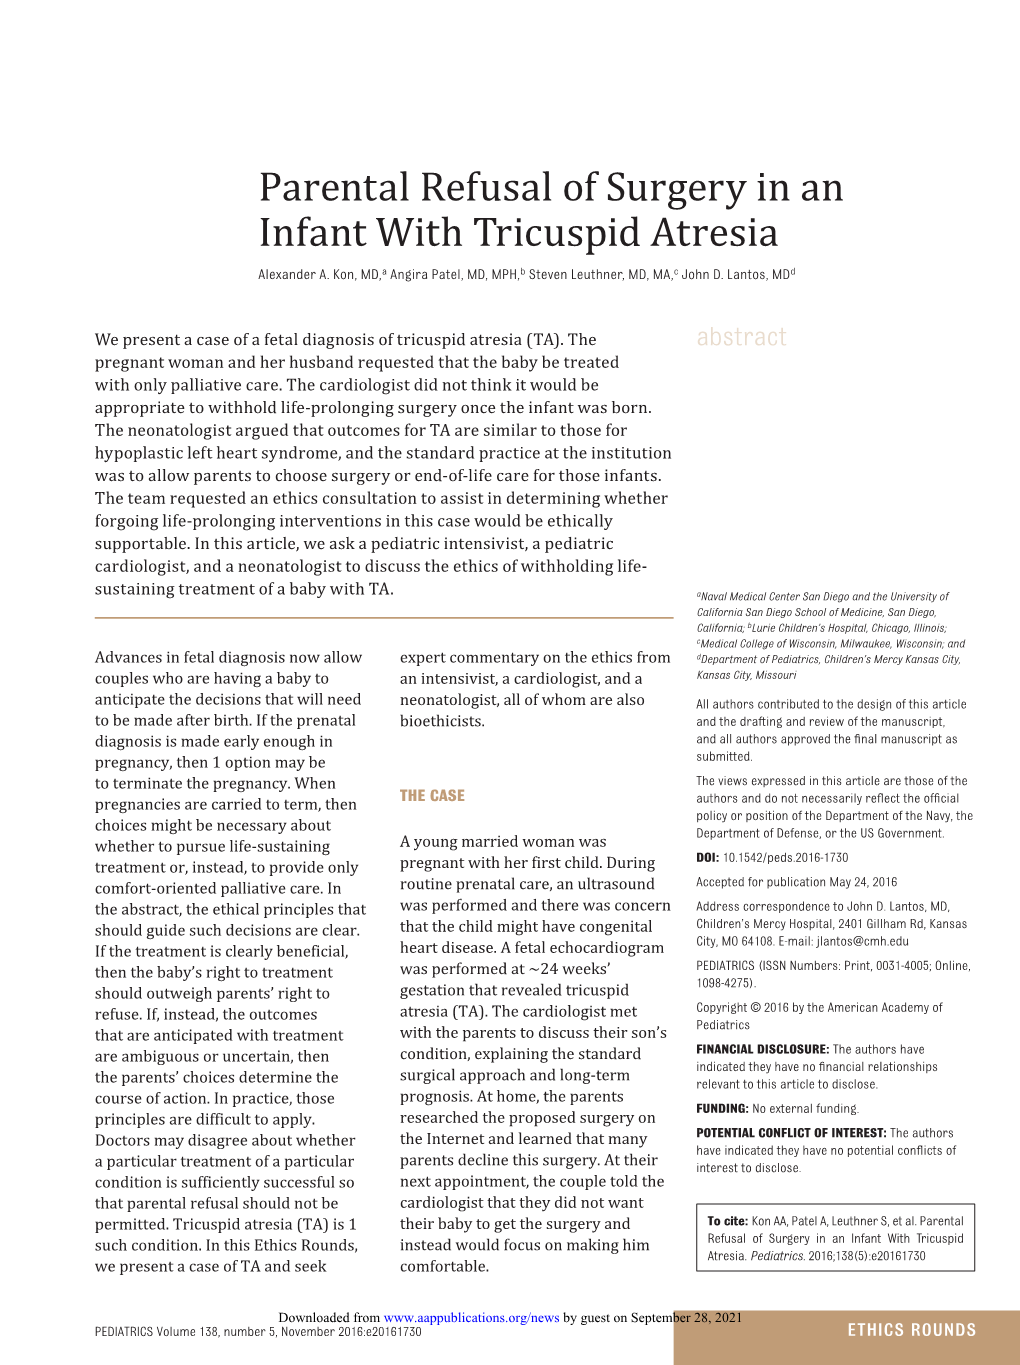 Parental Refusal of Surgery in an Infant with Tricuspid Atresia Alexander A